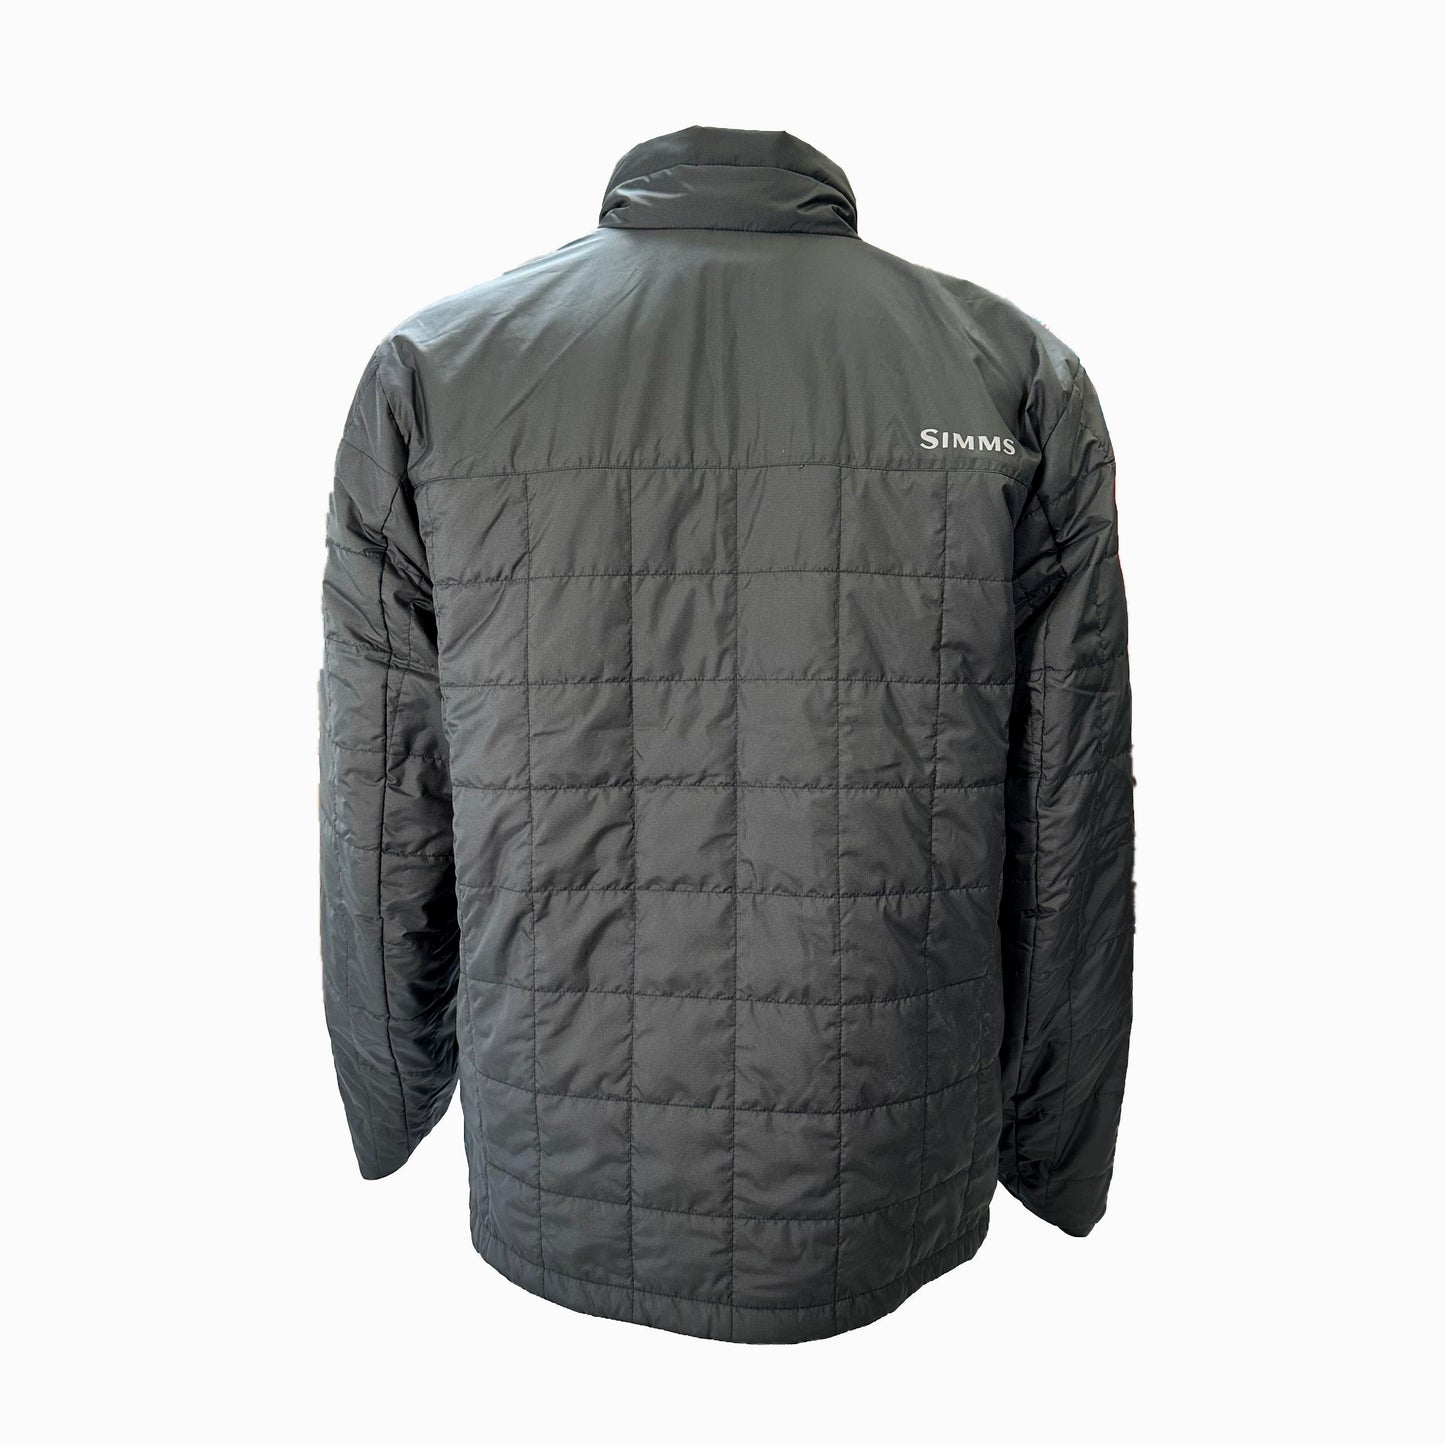 
                  
                    Simms Fall Run Collared Jacket with embroidered -HB< logo
                  
                